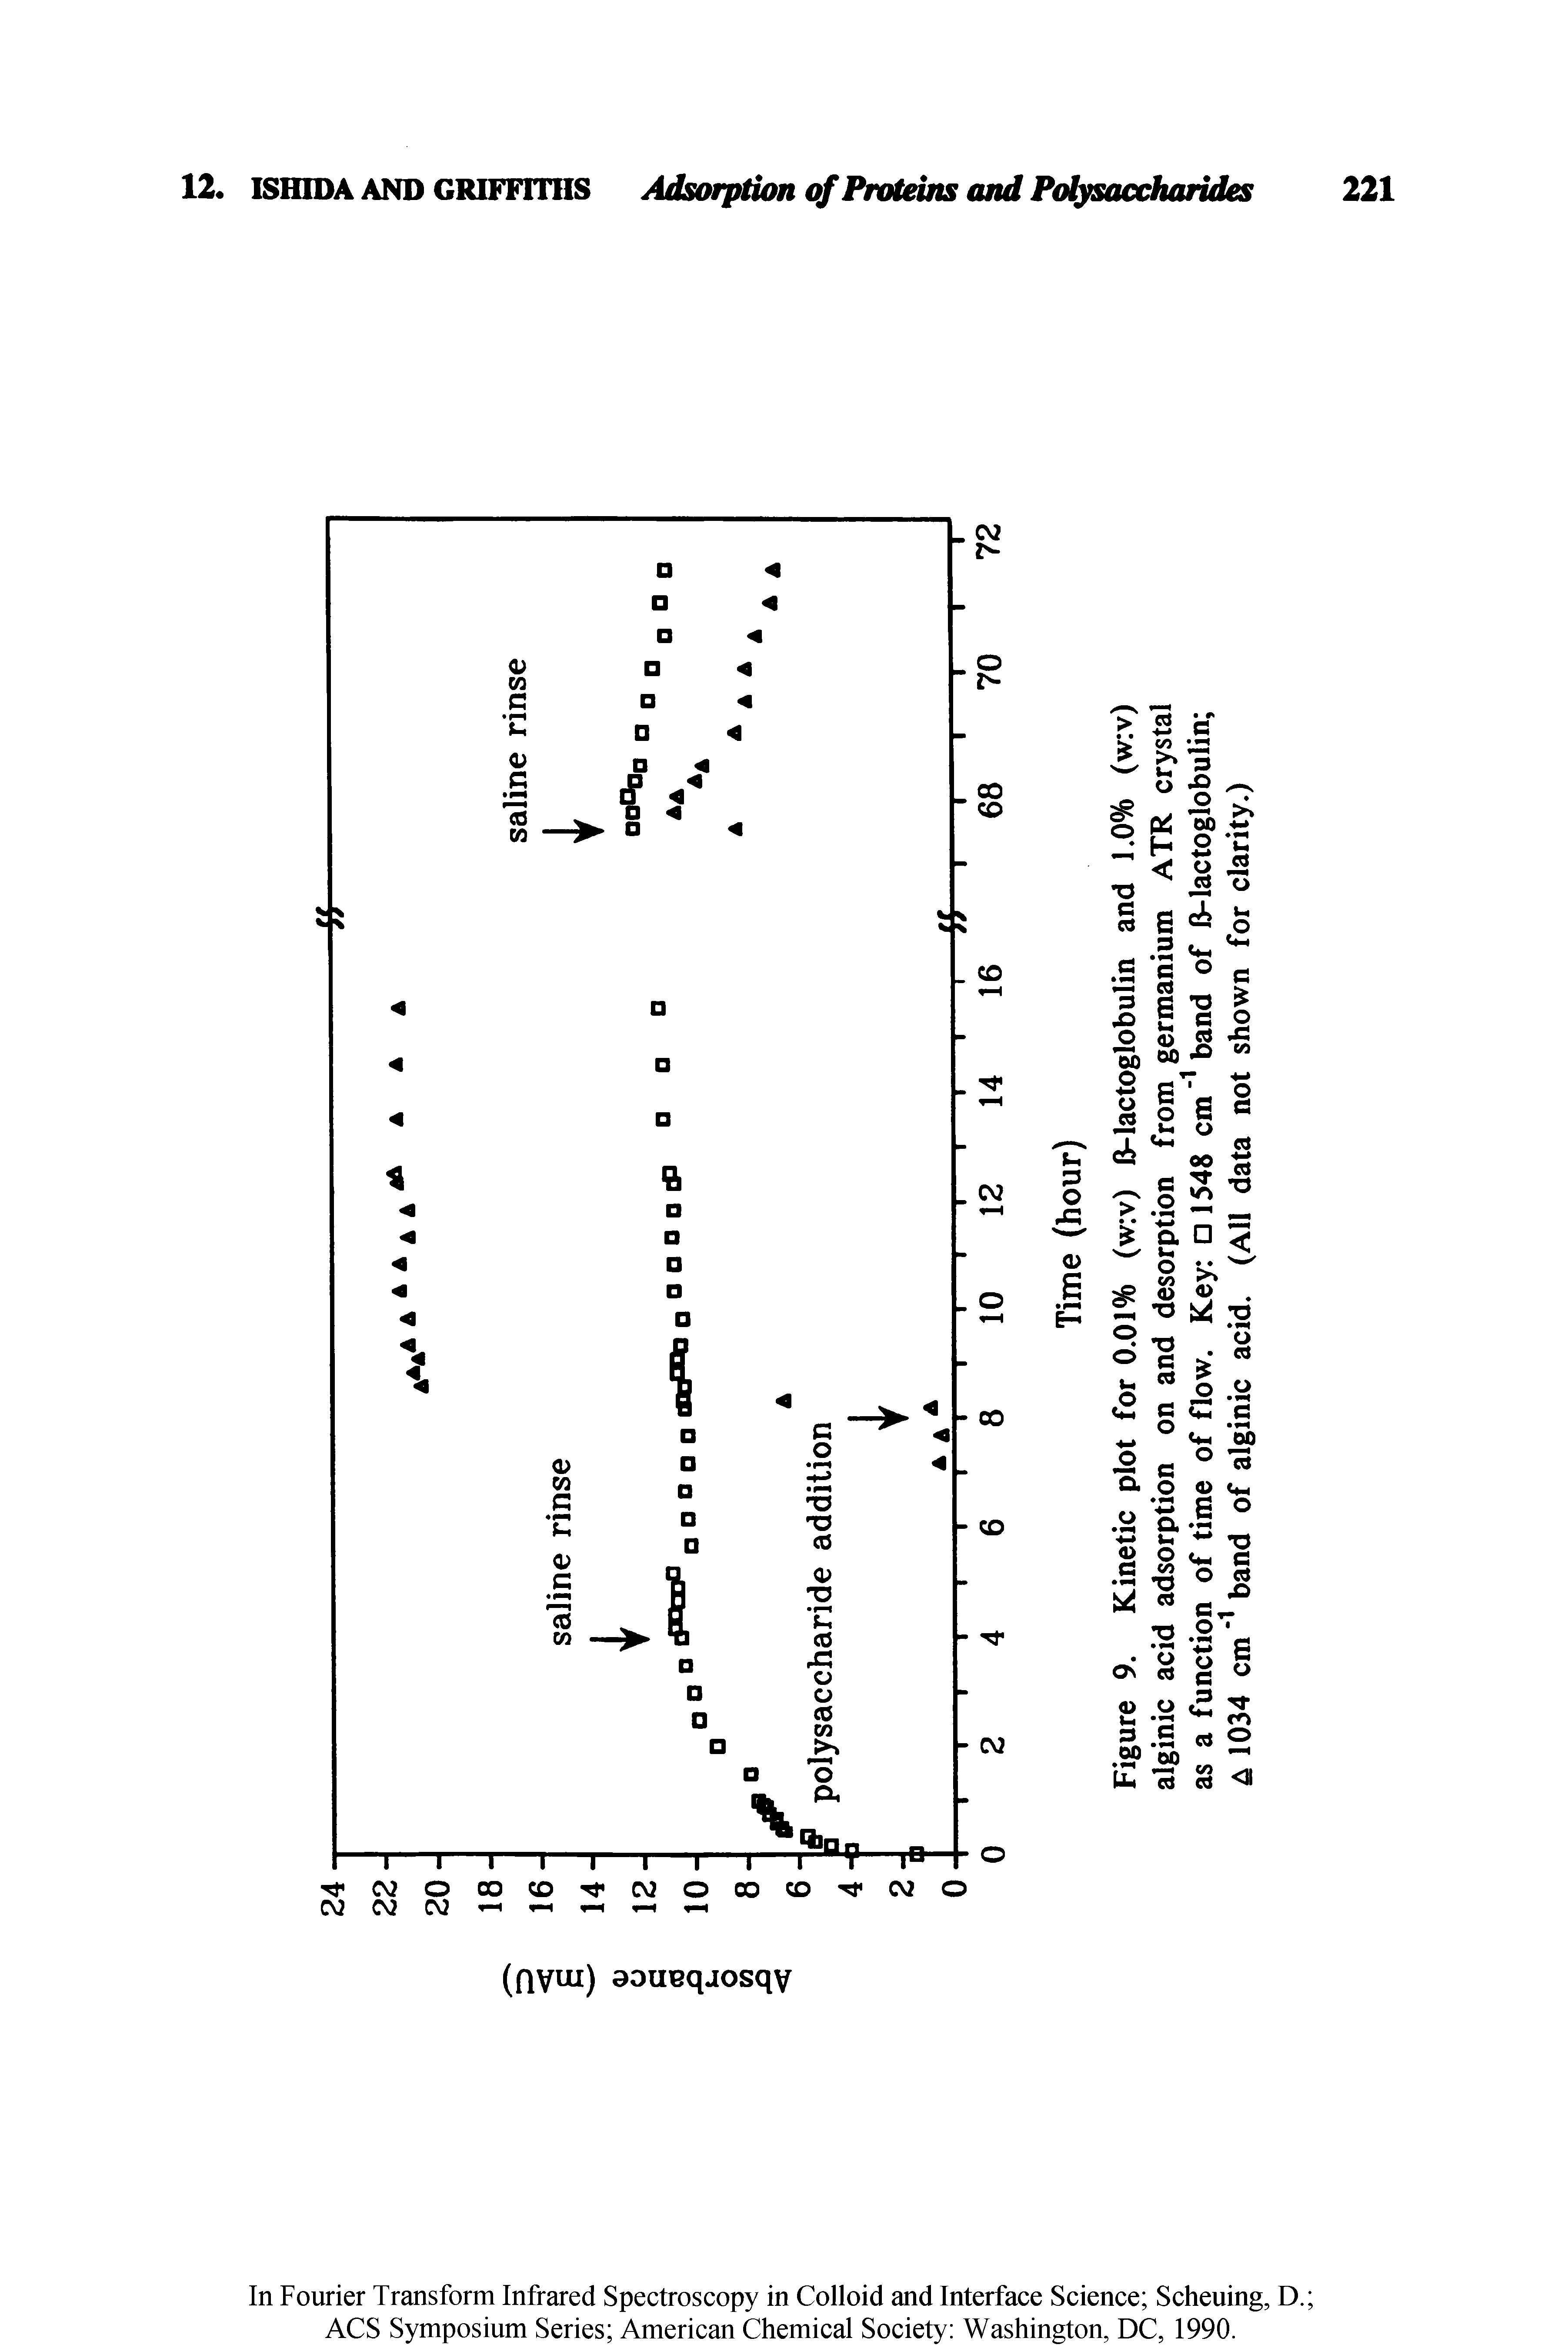 Figure 9. Kinetic plot for 0.01% (w v) B-lactoglobulin and 1.0% (w v) alginic acid adsorption on and desorption from germanium ATR crystal as a function of time of flow. Key D1548 cm 1 band of 13-lactoglobulin 1034 cm 1 band of alginic acid. (All data not shown for clarity.)...